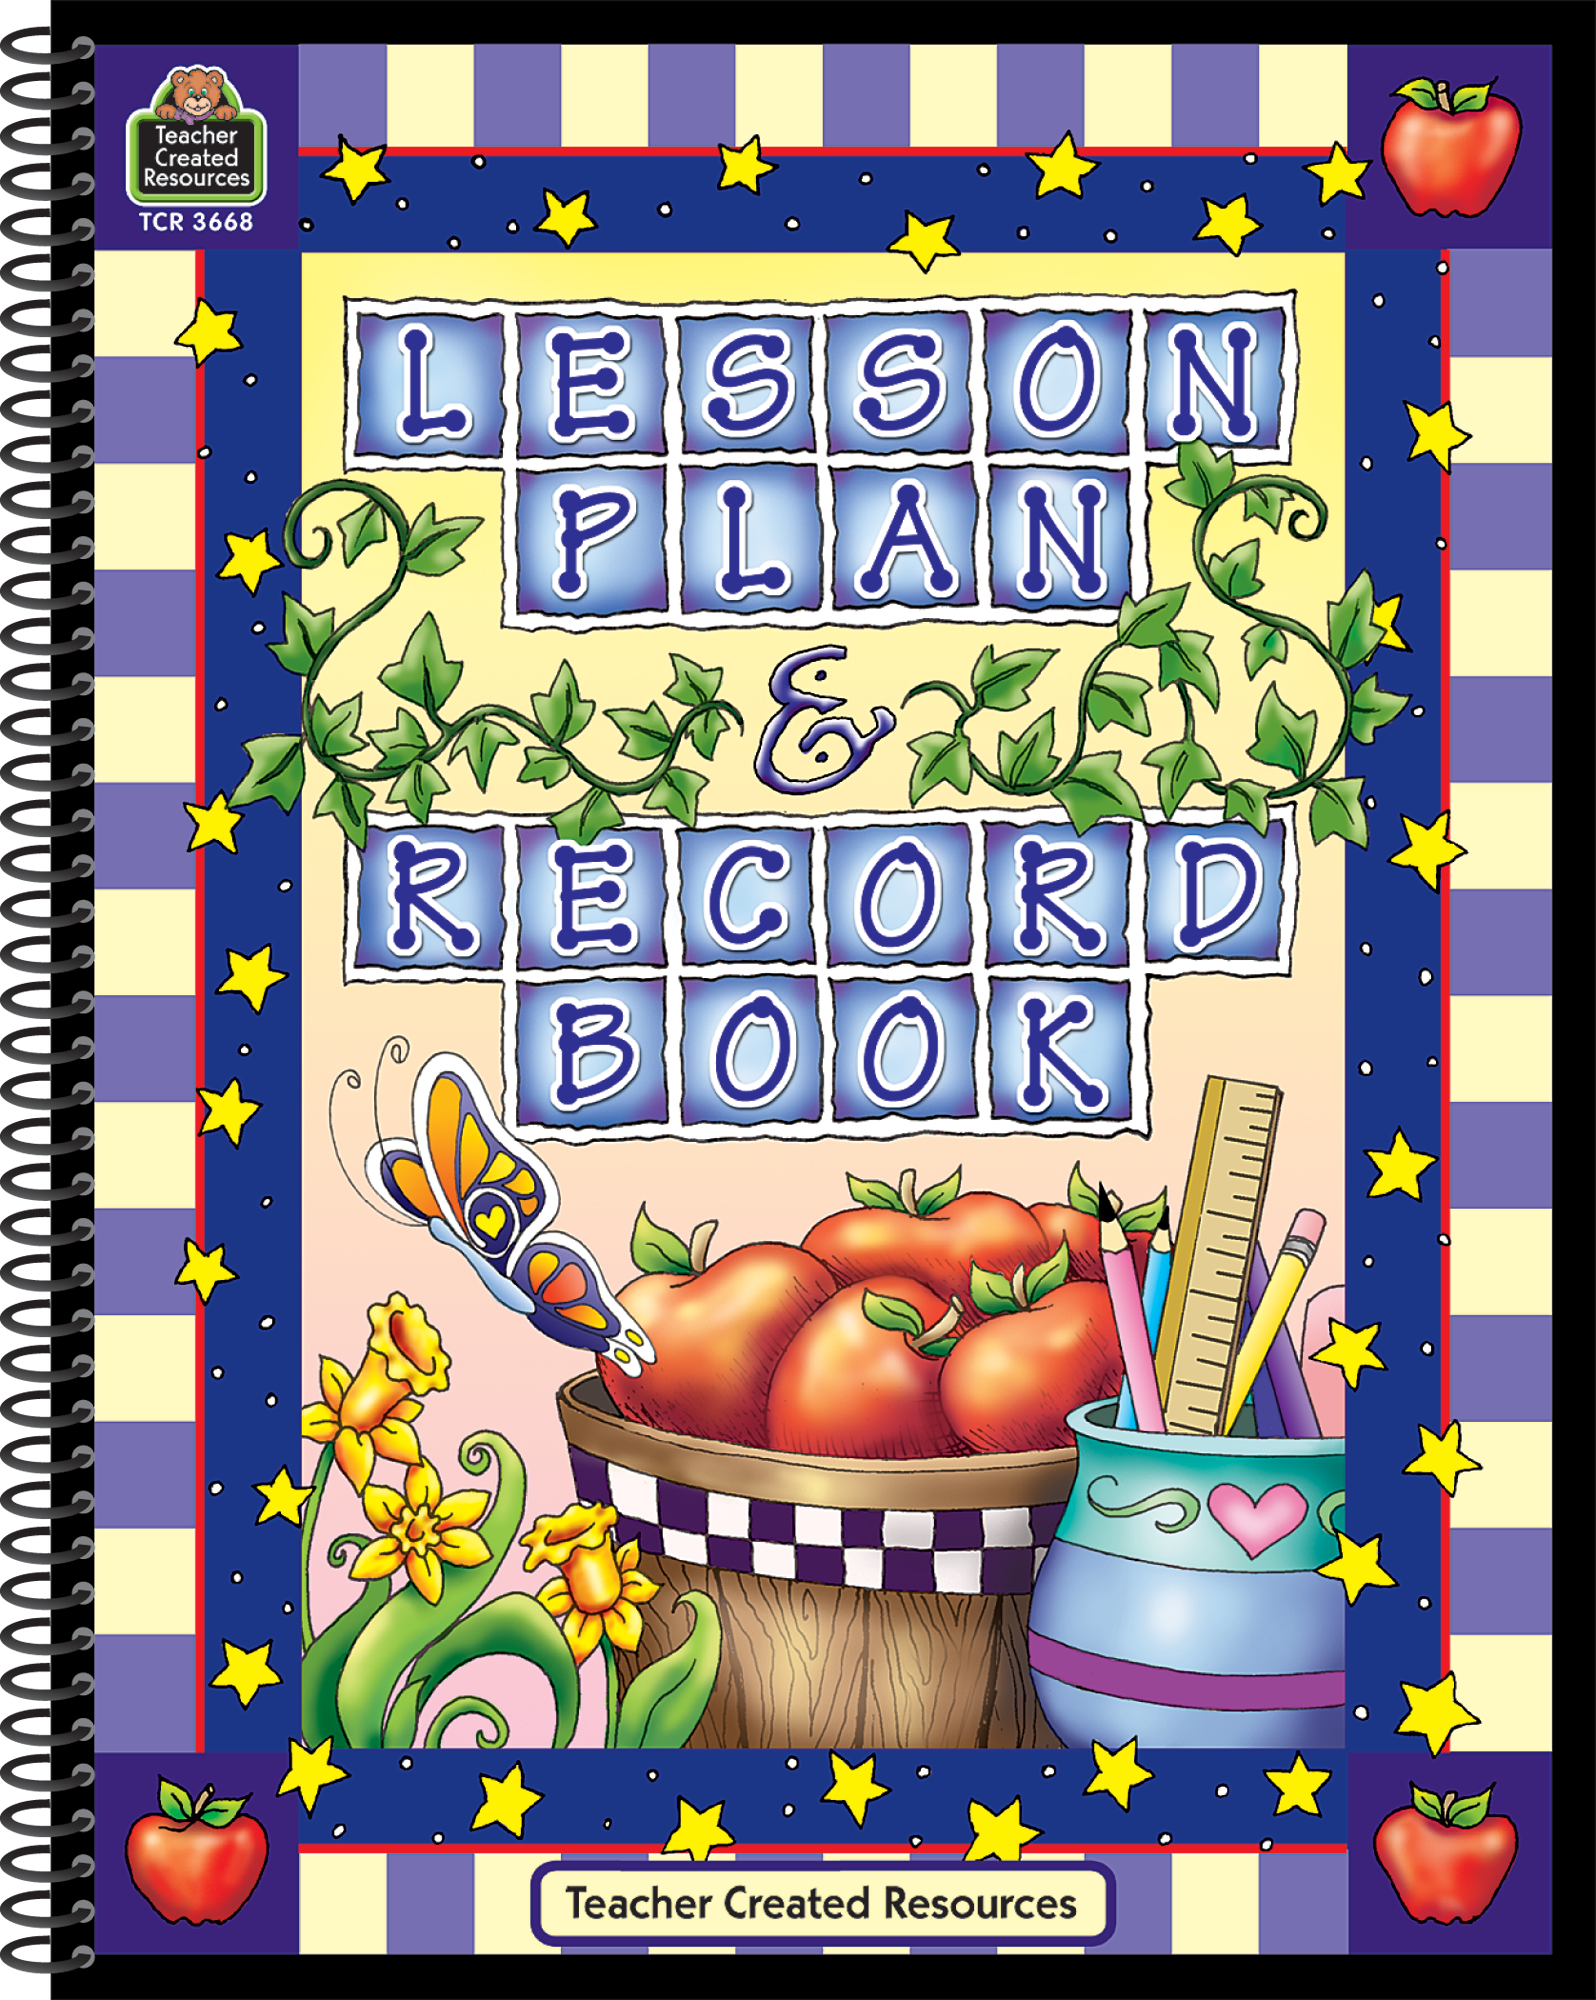 lesson-plan-and-record-book-tcr3668-teacher-created-resources